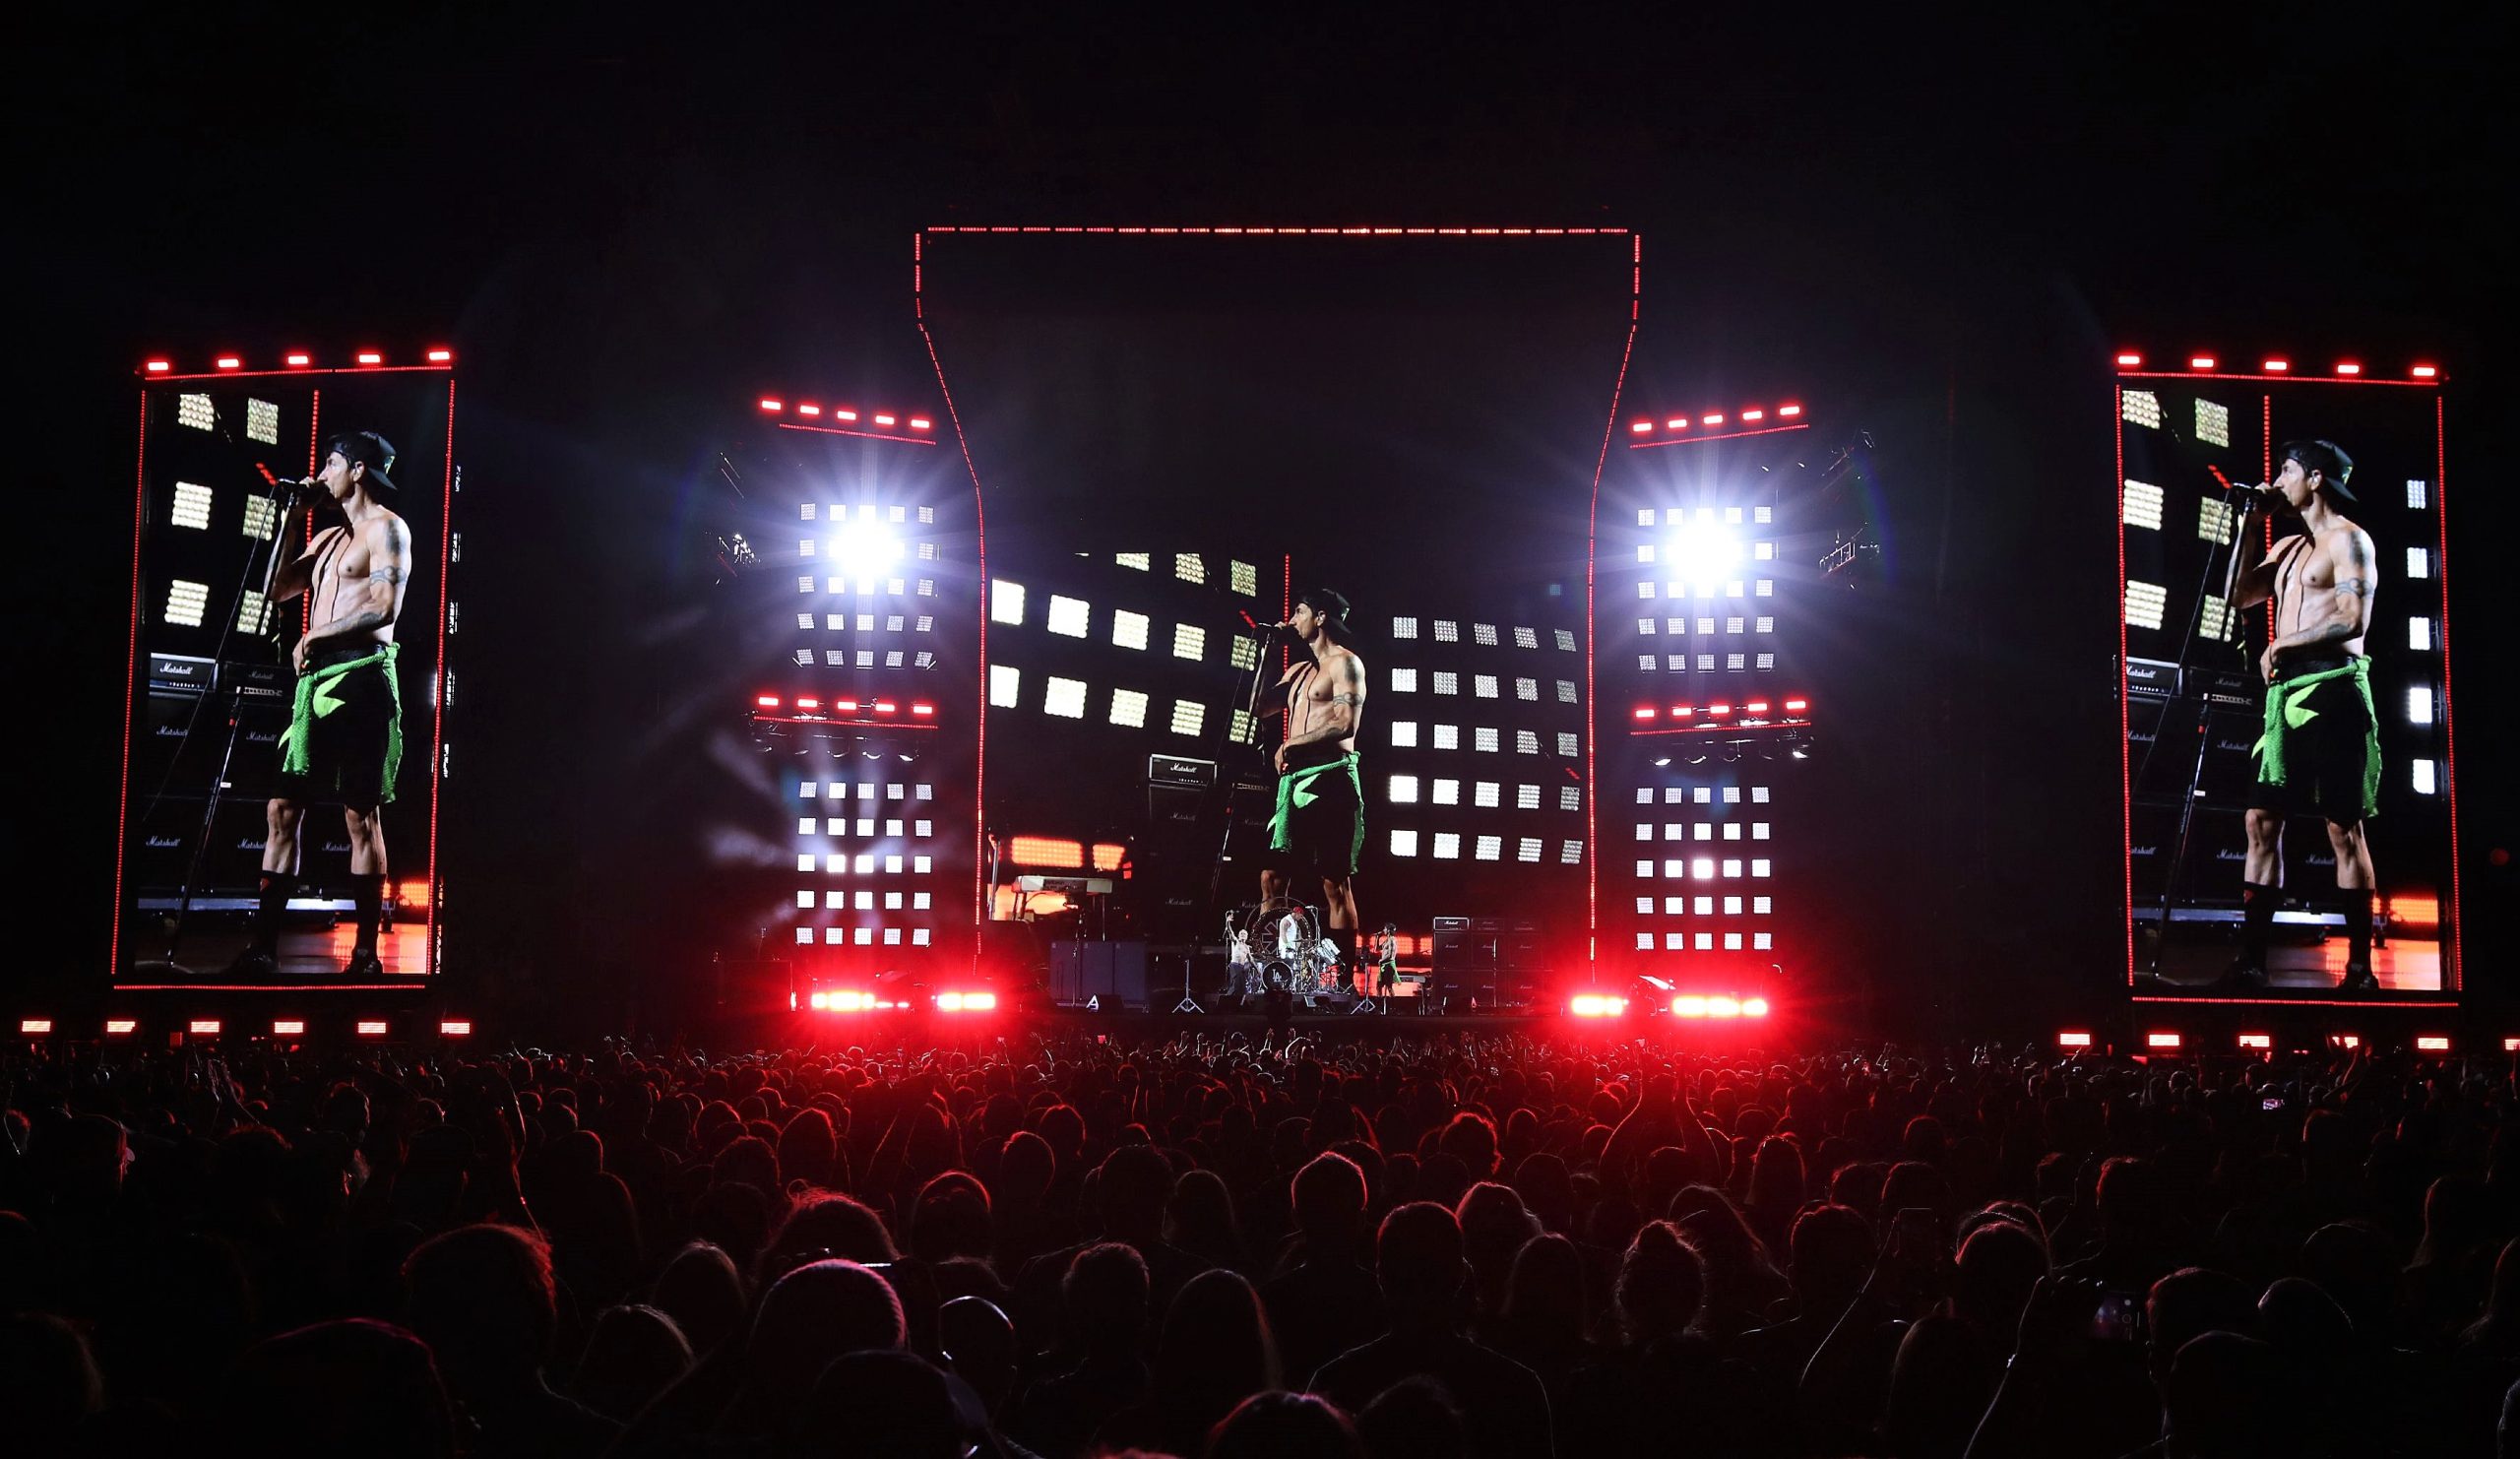 Scott Holthaus and Leif Dixon rev up Red Hot Chili Peppers Tour with CHAUVET Professional